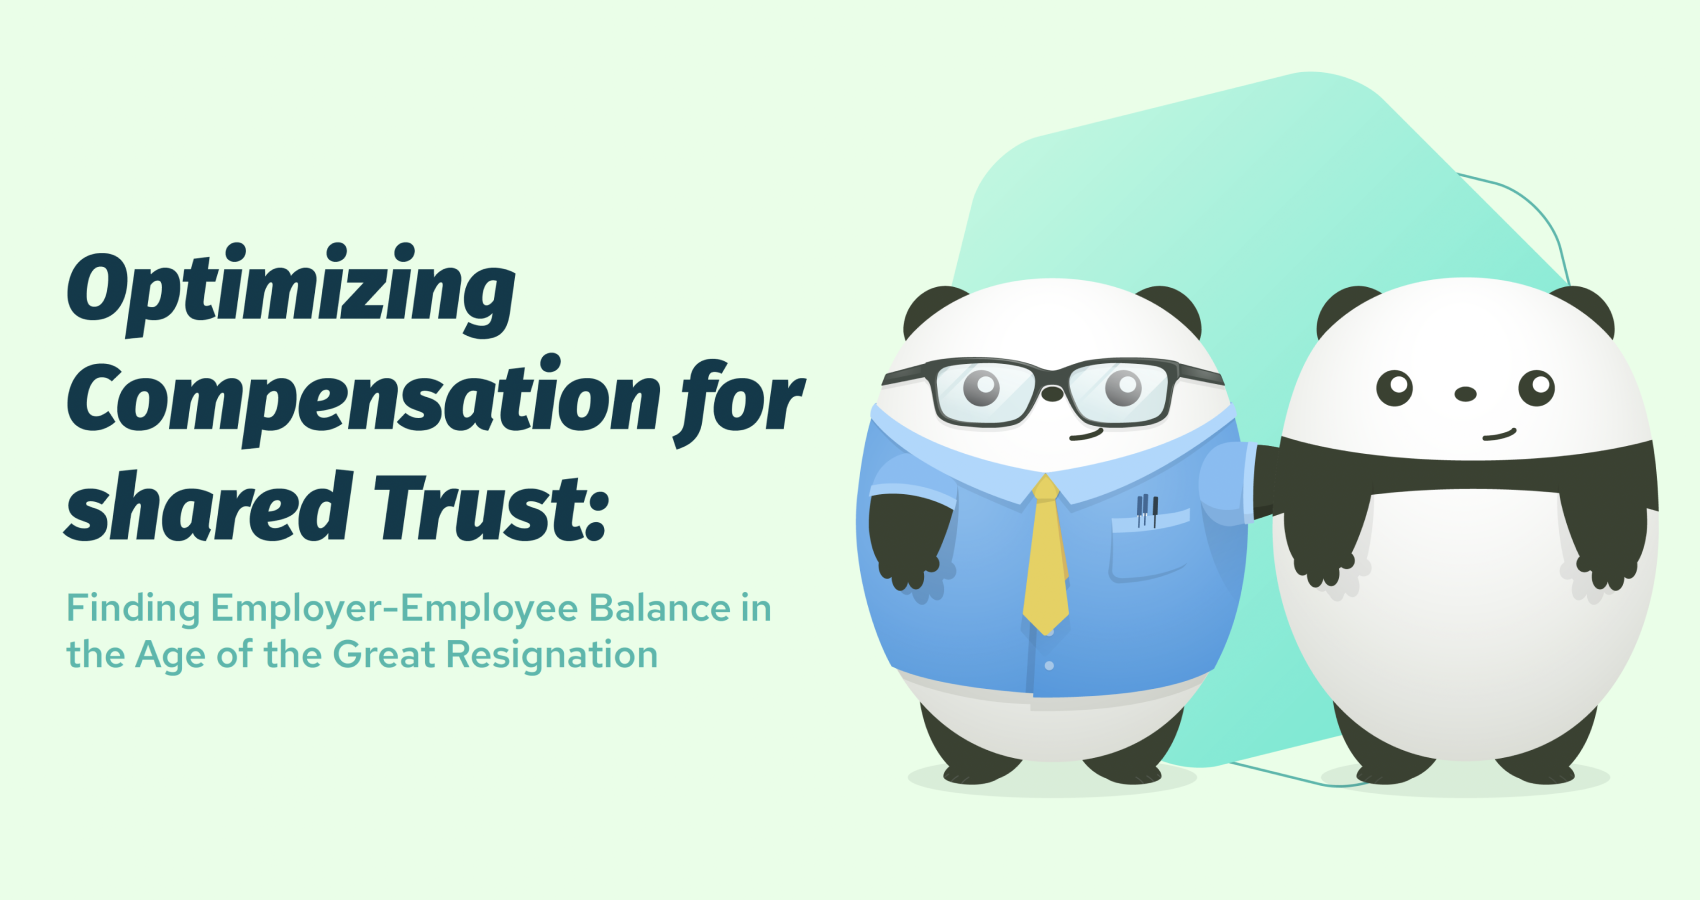 Optimizing Compensation for Shared Trust